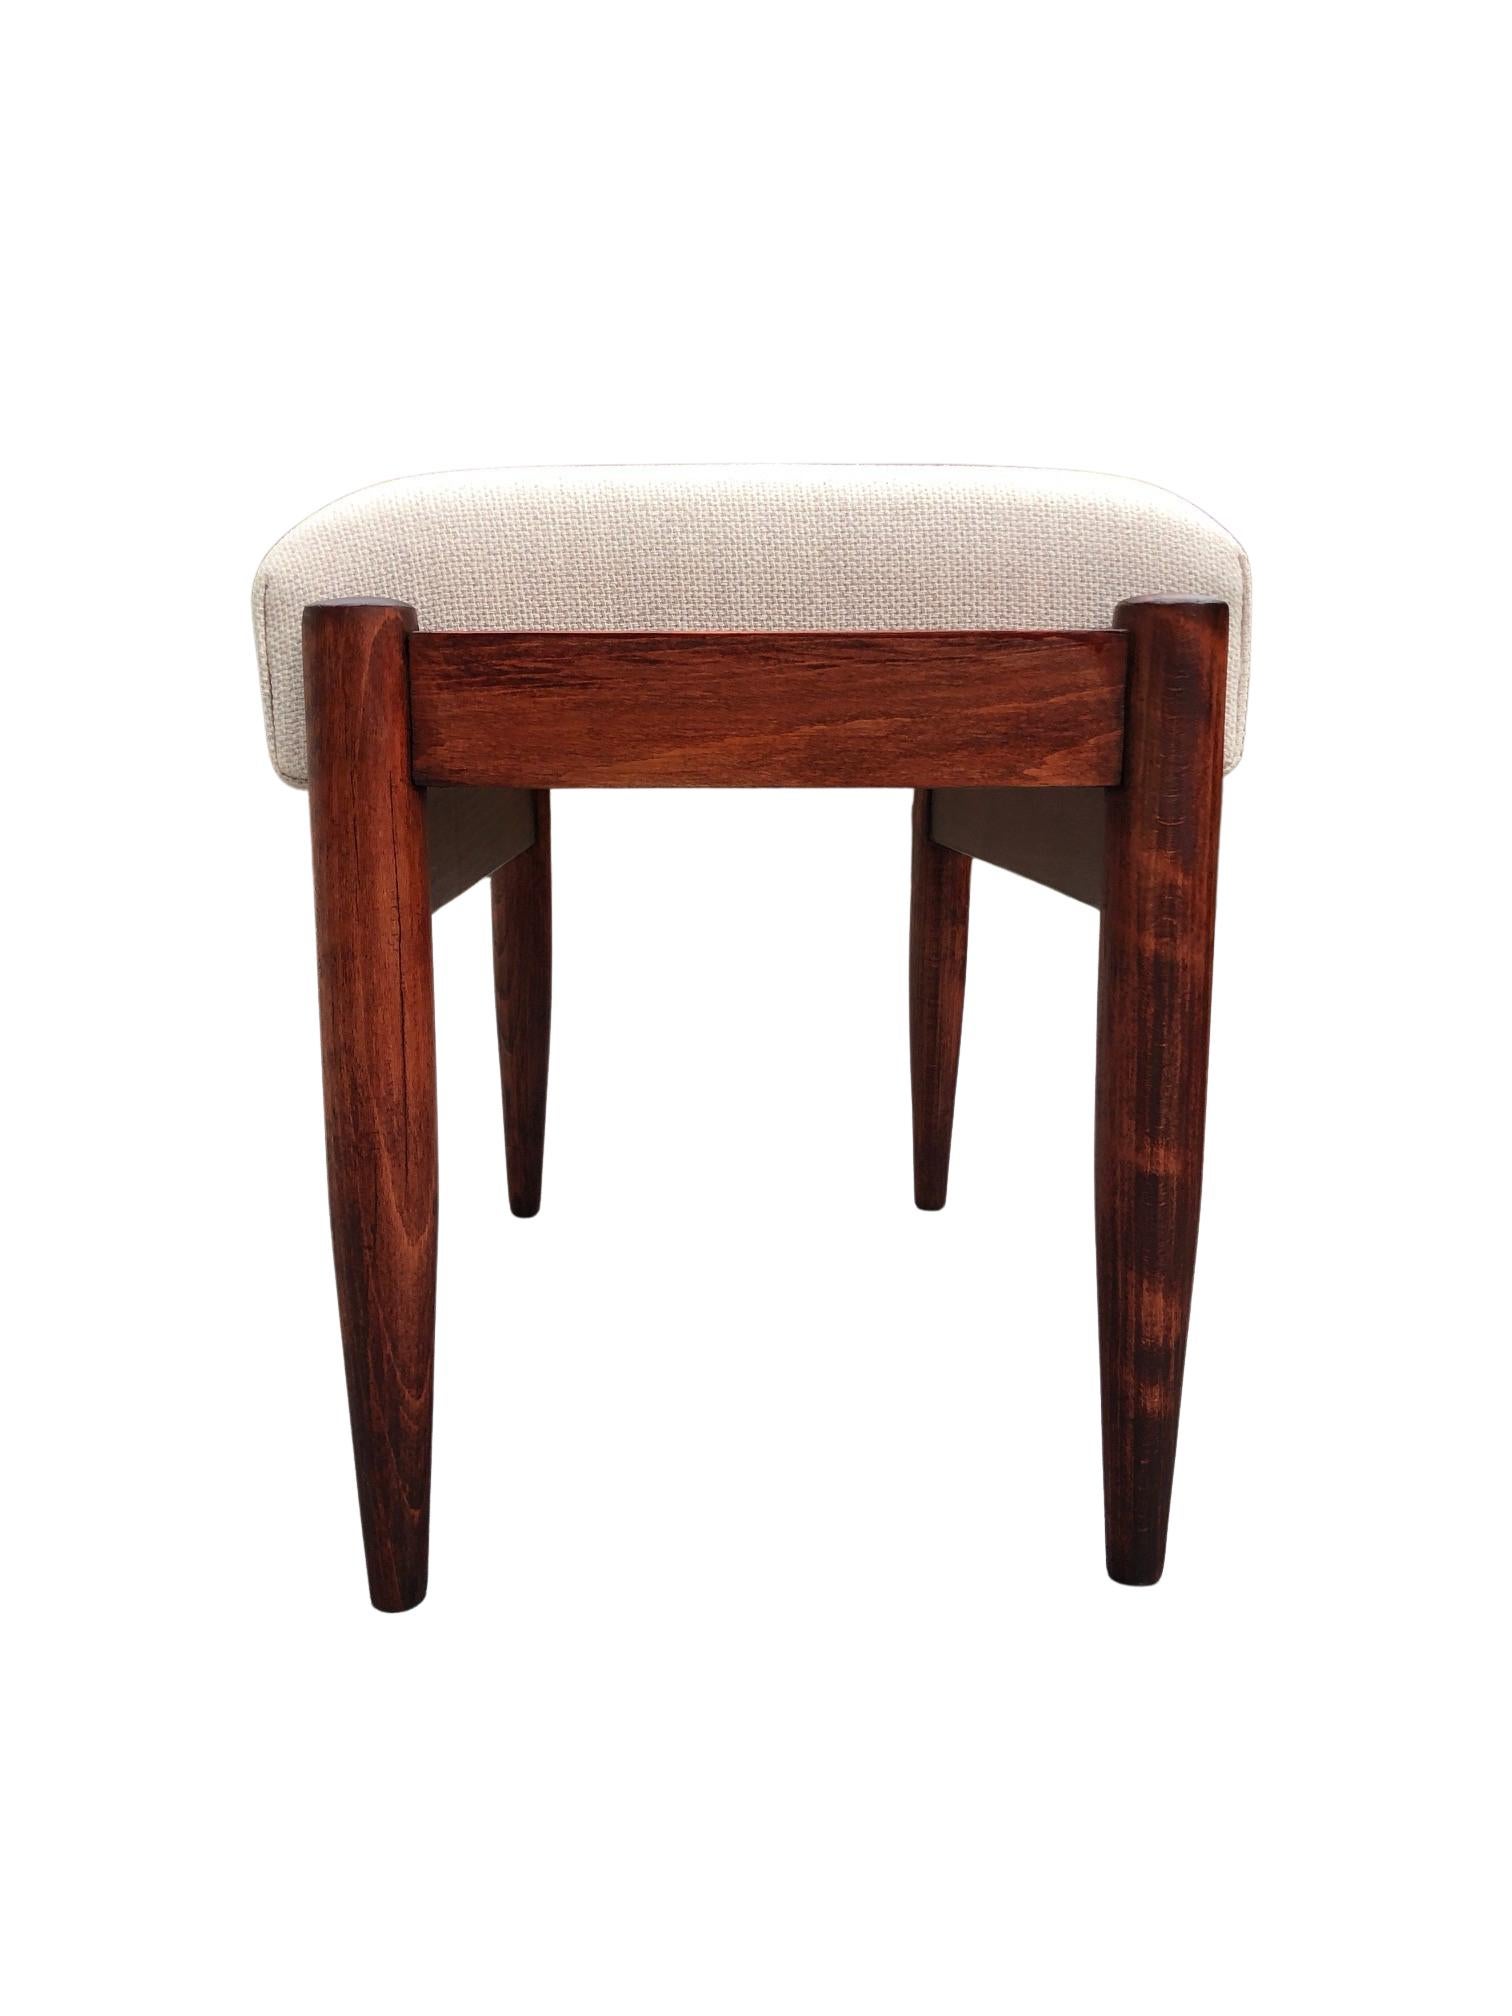 A comfortable stool, designed by Edmund Homa, manufactured by Goscinska Furniture Factory in Poland in the 1960s. 

The structure is made of solid beechwood in a warm color, finished with a semi matte varnish. The upholstery is made of a high